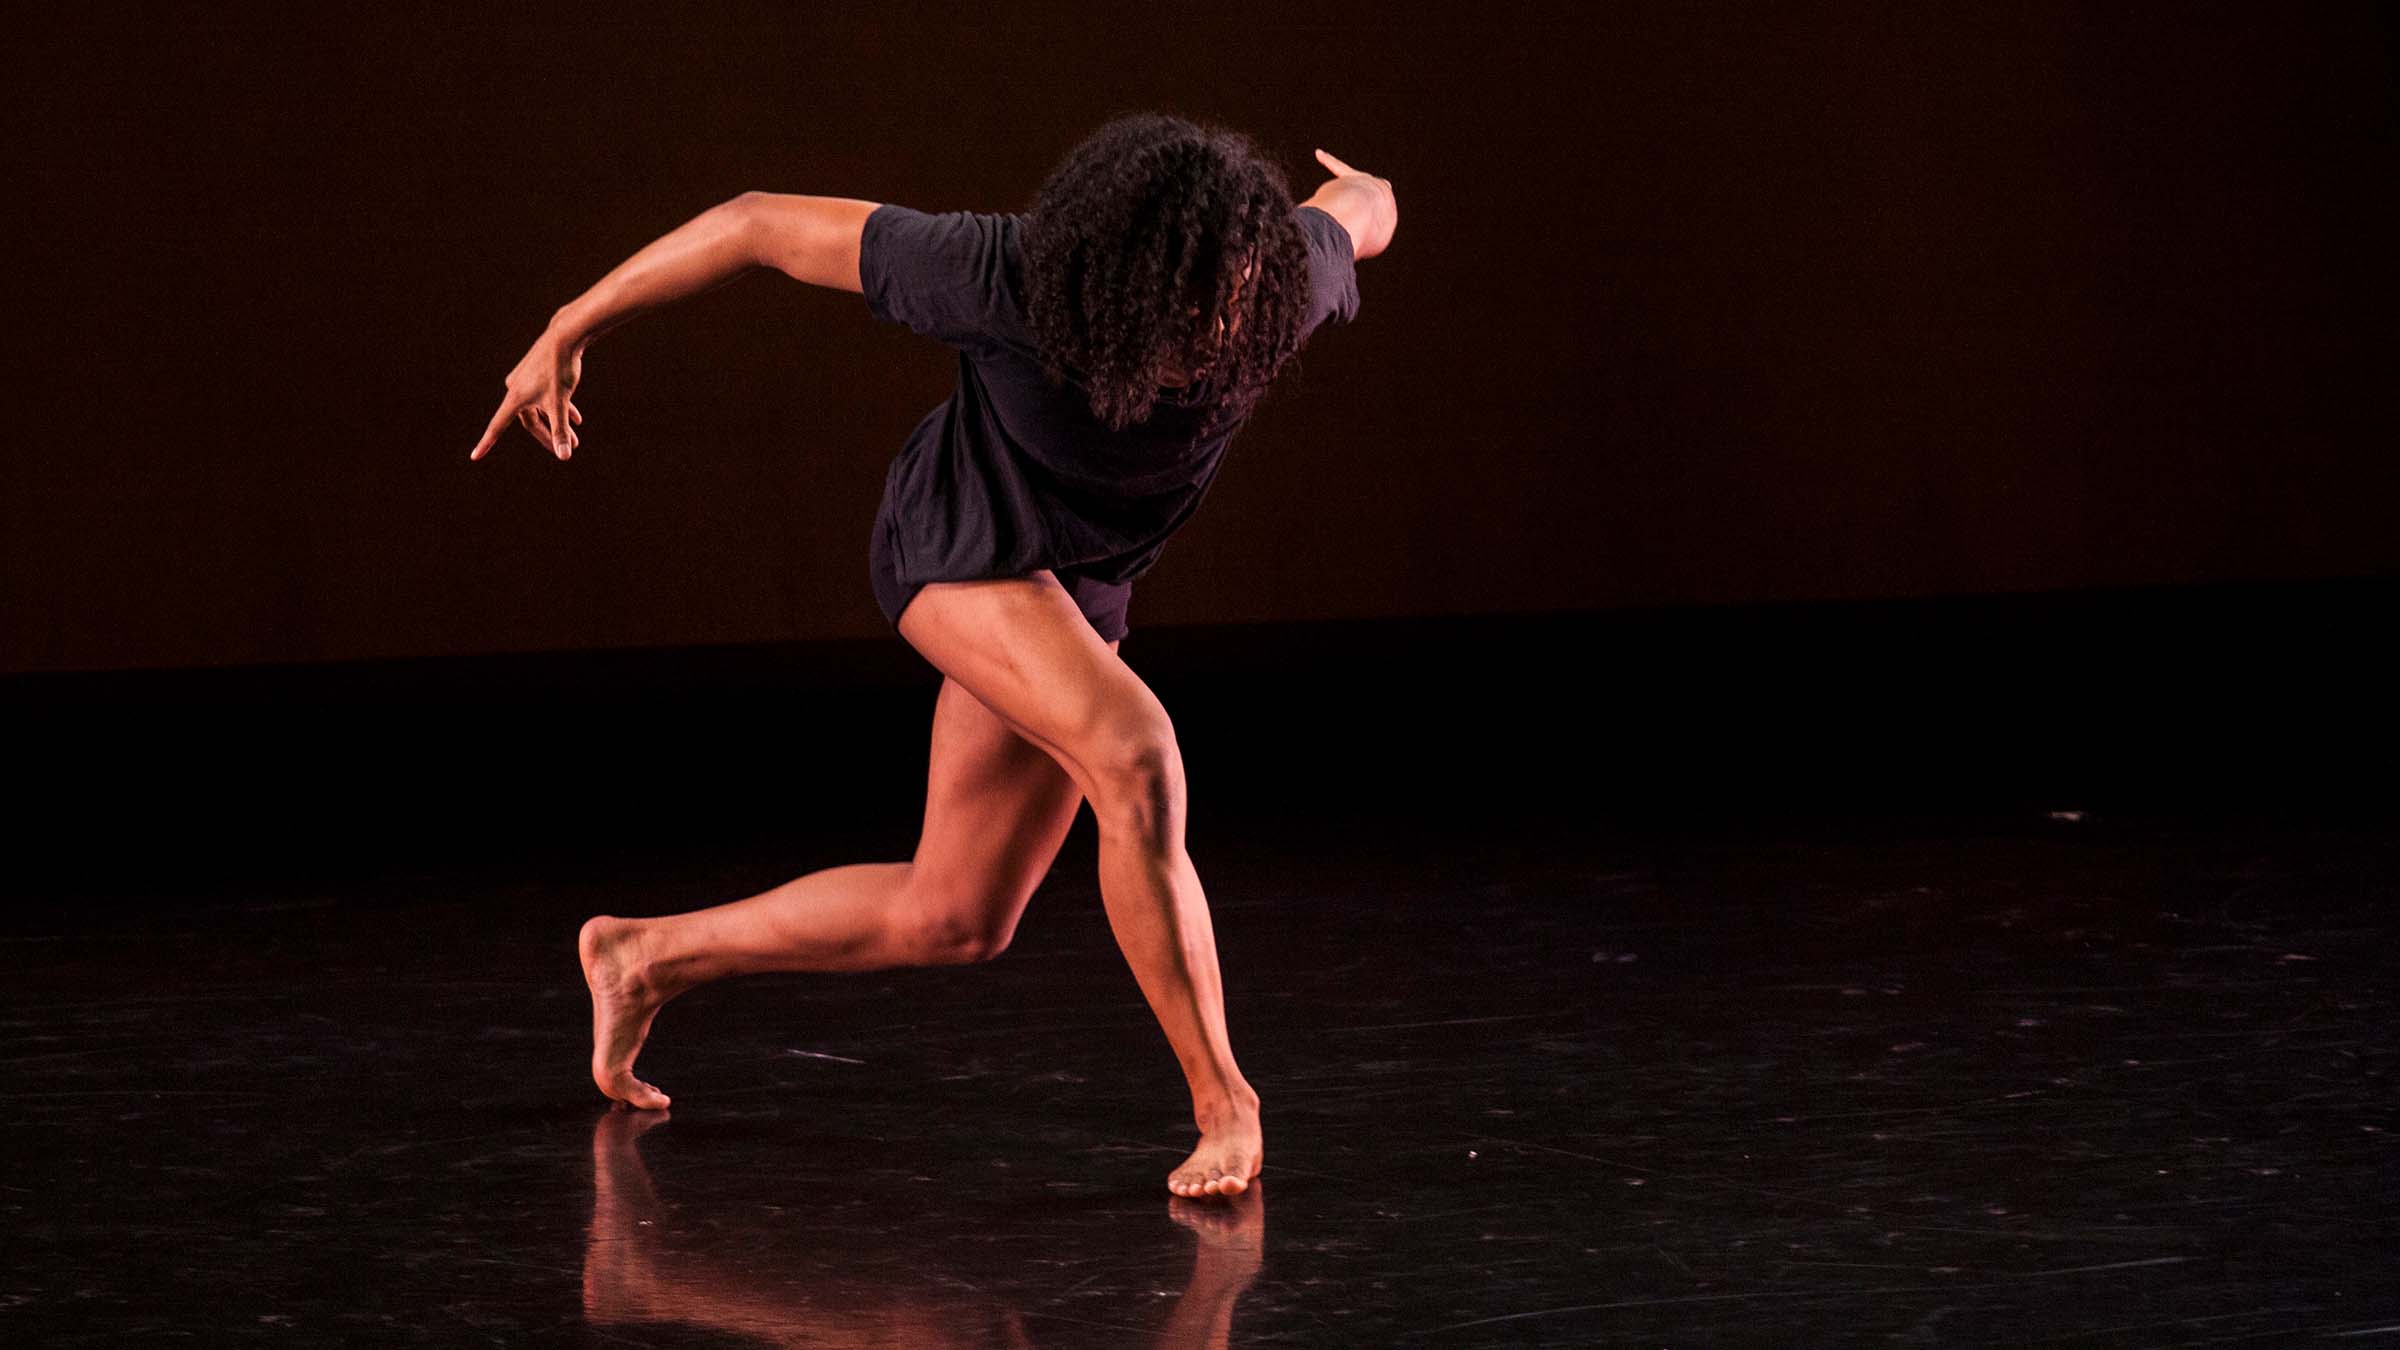 A dancer on a darkened stage crouches in mid-pose. Photo by Rachel Garbade ’15.